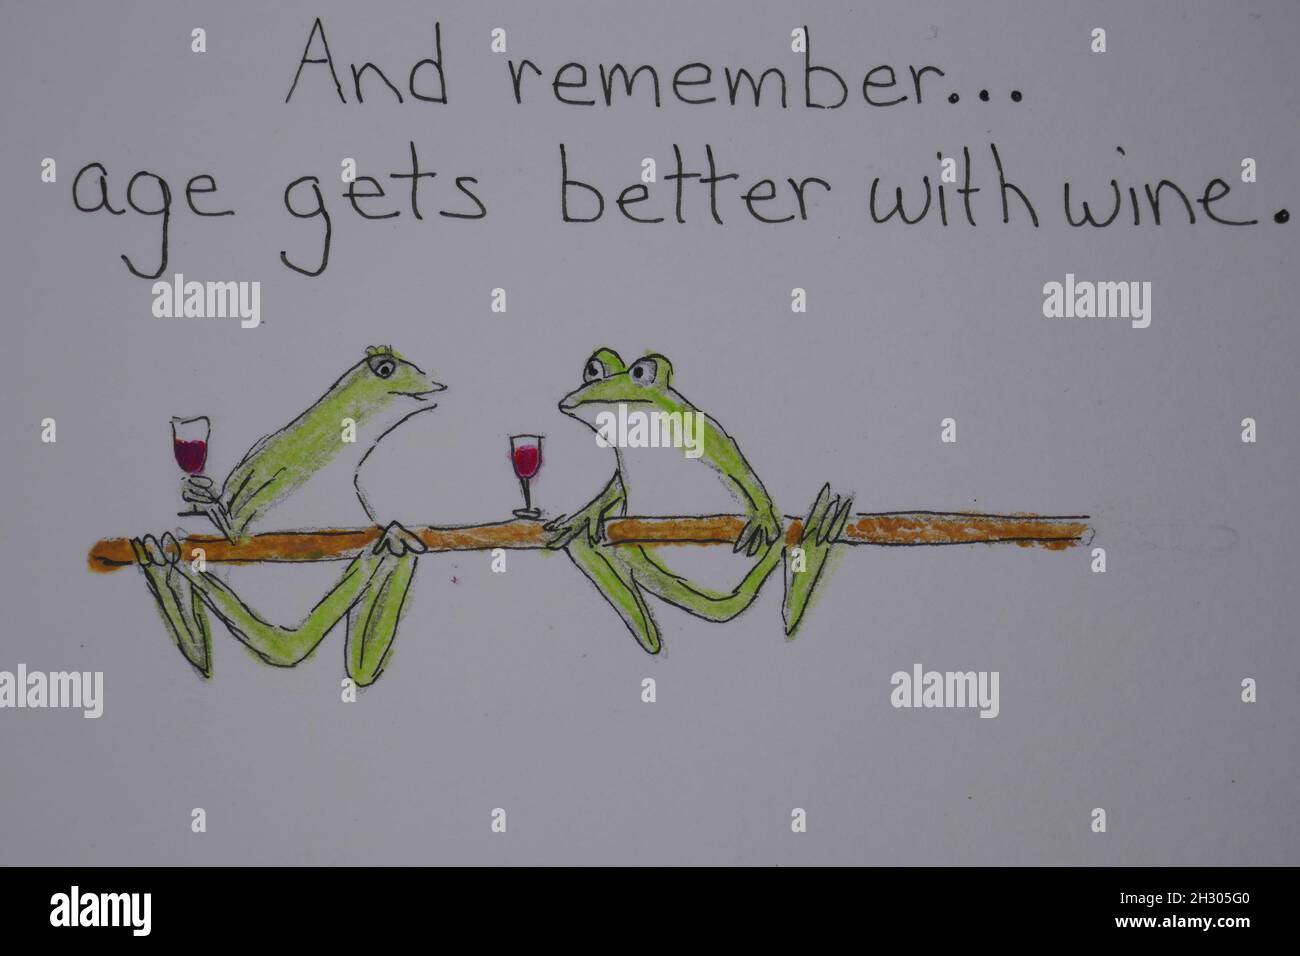 Humorous aging illustration with frogs drinking wine Stock Photo